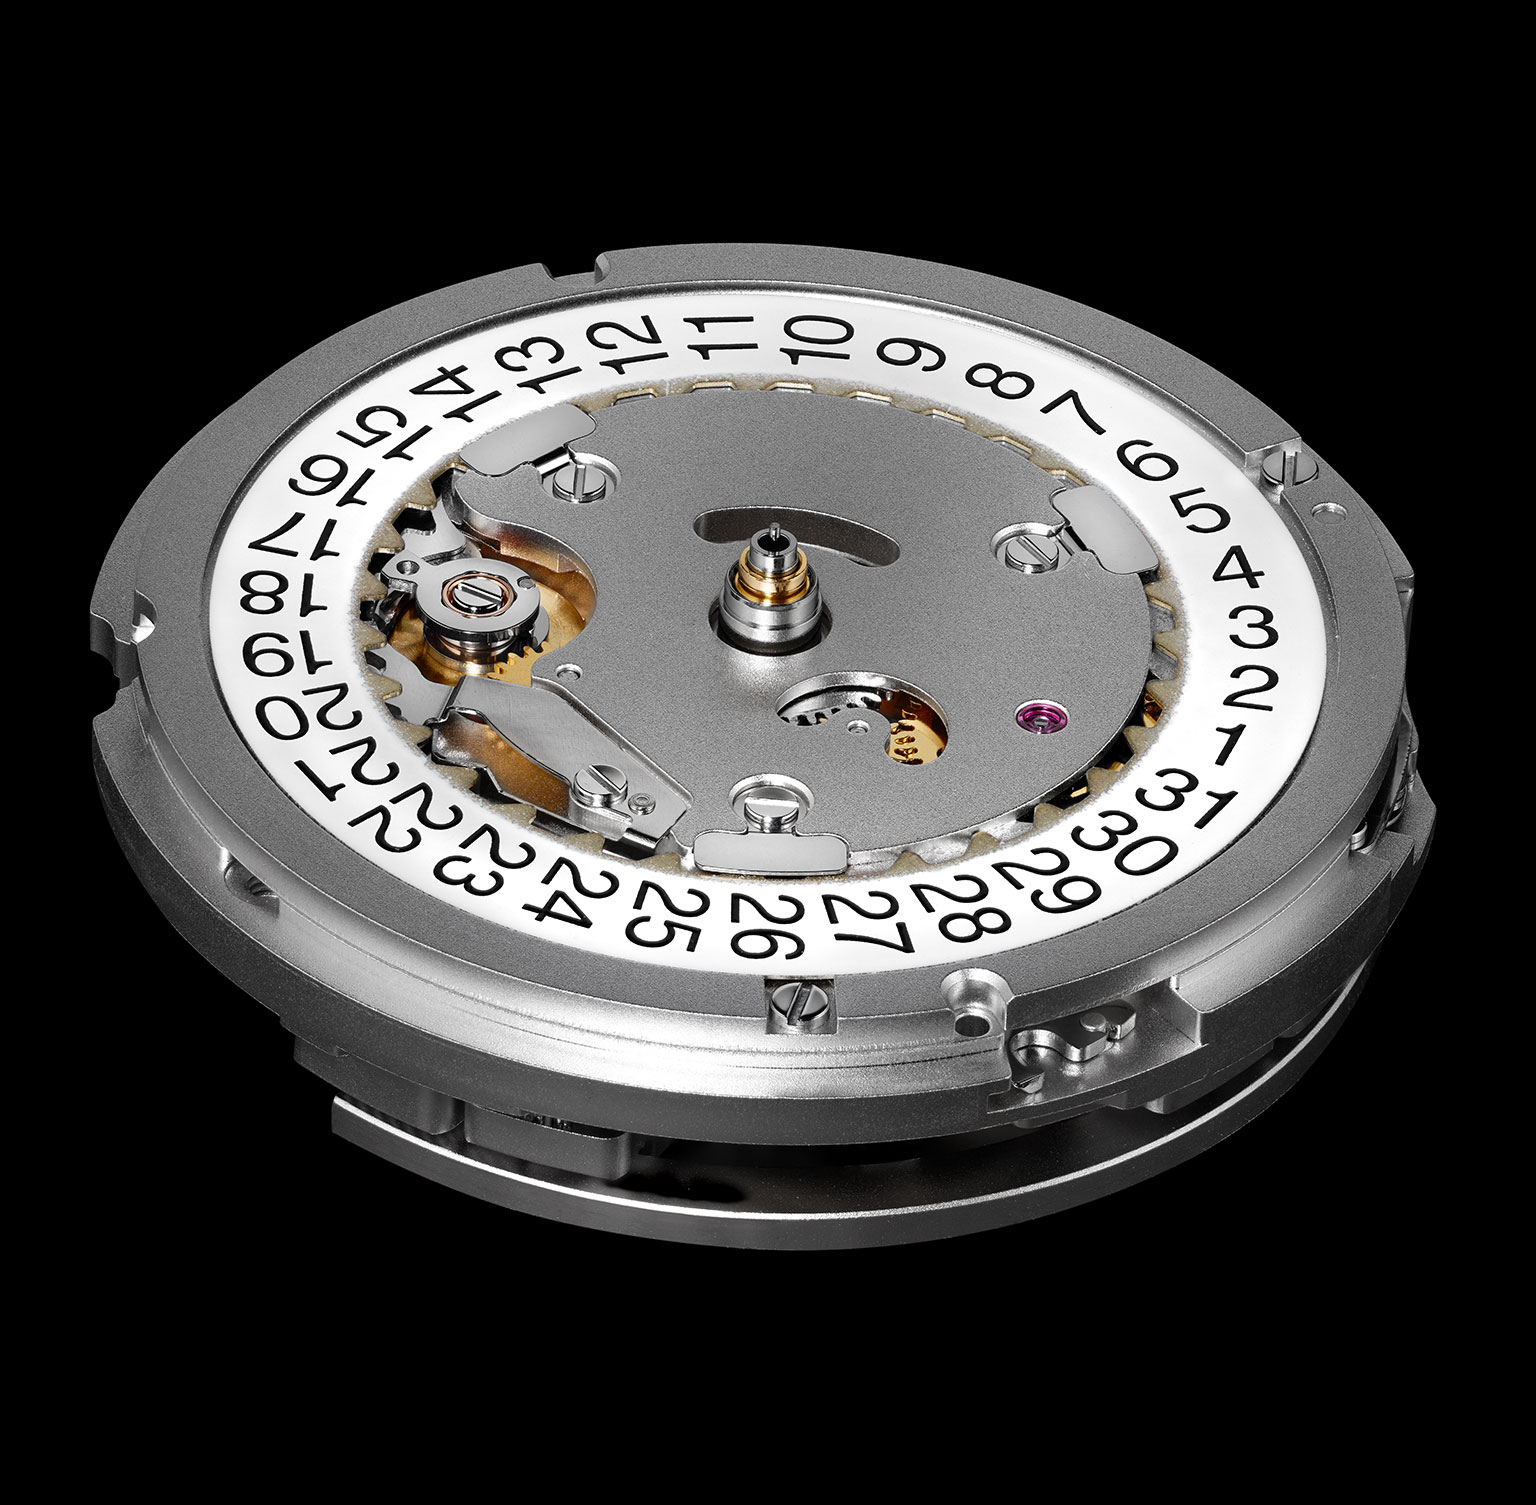 Norqain Partners With Kenissi, The Watch Movement Manufacture Tied To Tudor & Chanel Watch Industry News 